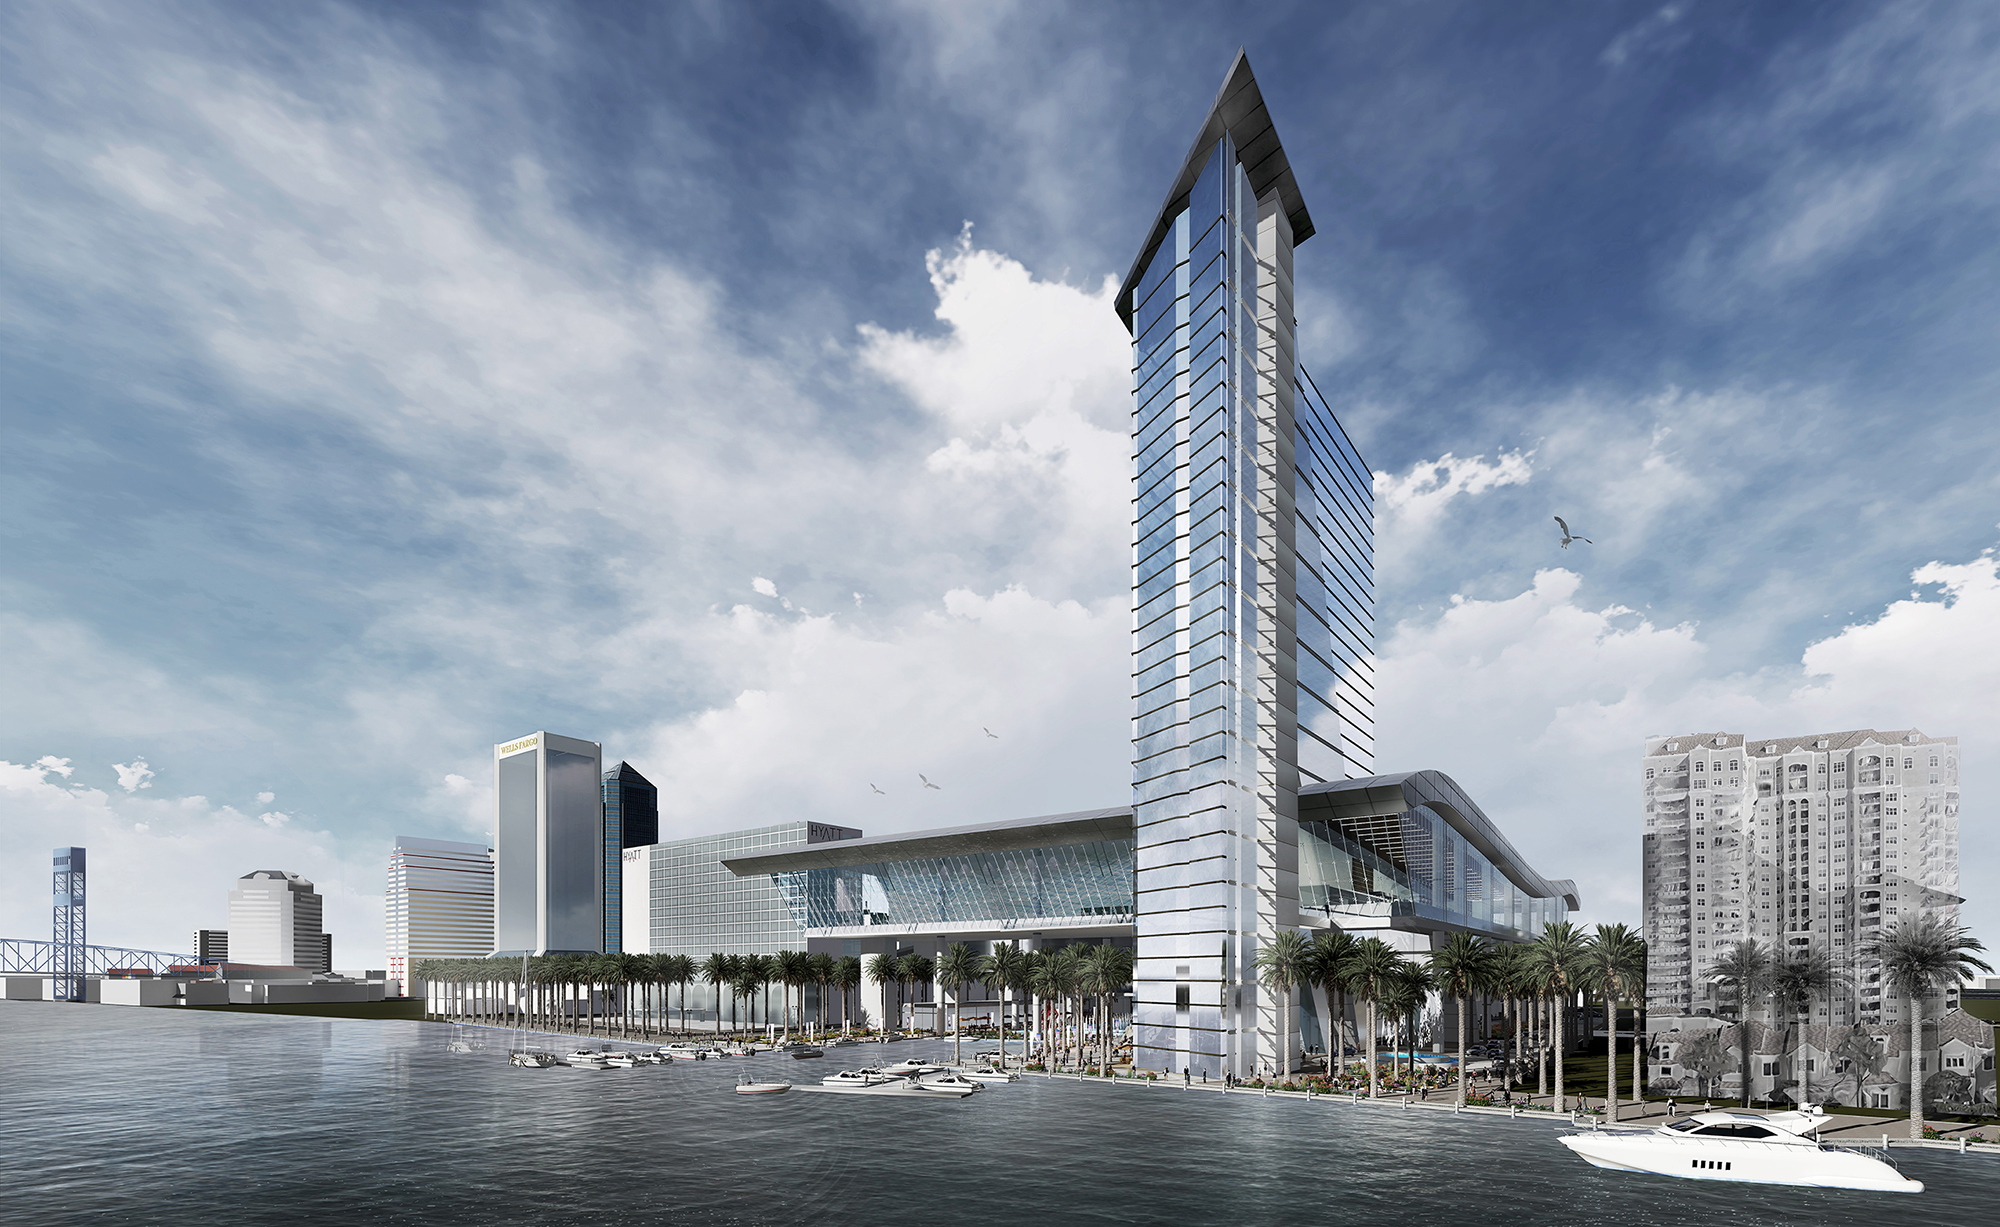 The  plan for a $550 million convention center Downtown has the support of the Hyatt Regency Jacksonville Riverfront parent company Westmont Hospitality Group Inc.